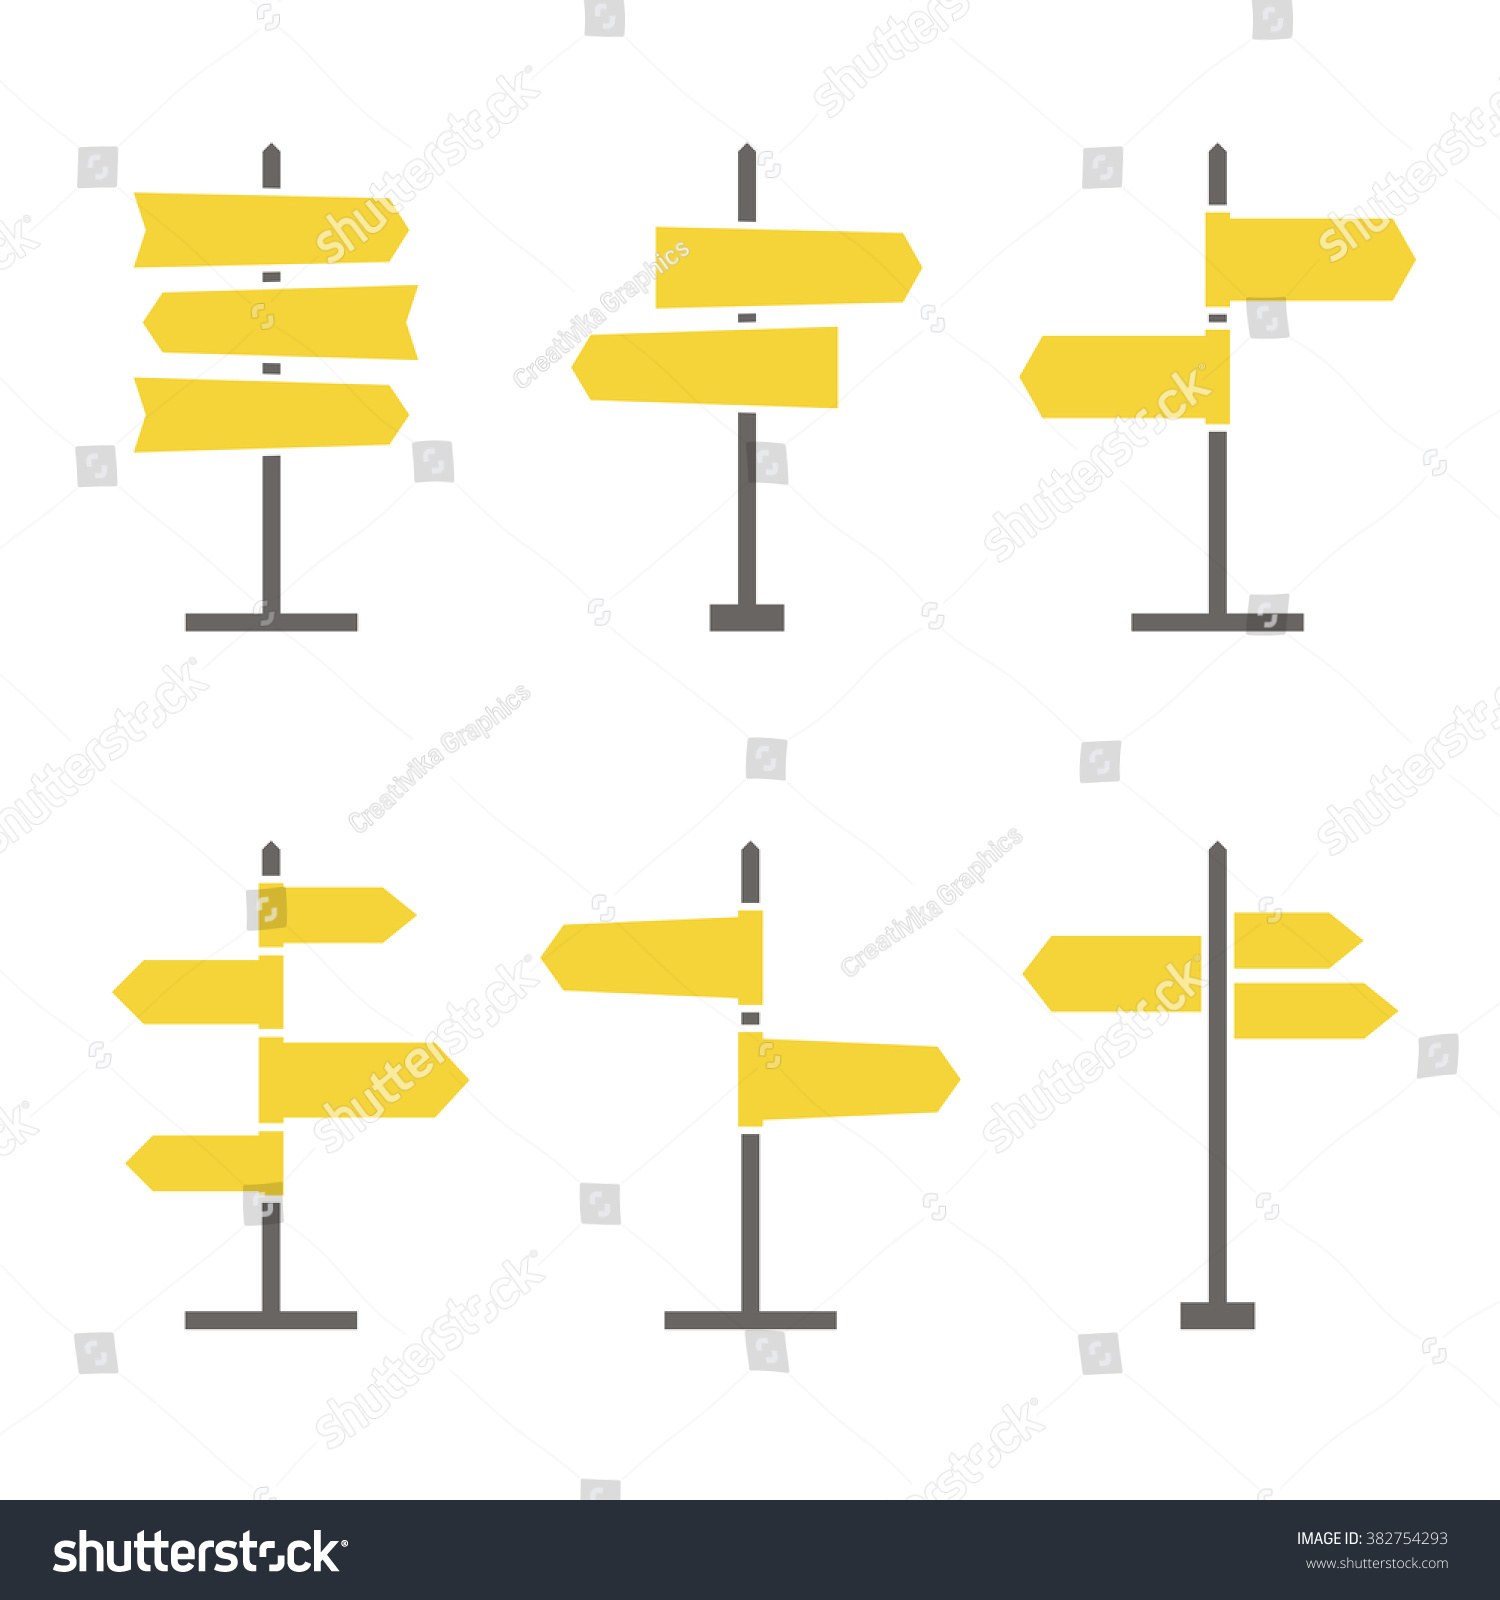 Set of 6 road signs flat icons. Collection of signpost icons in flat style. Blank templates for navigational text. EPS8 clean vector illustration. #382754293